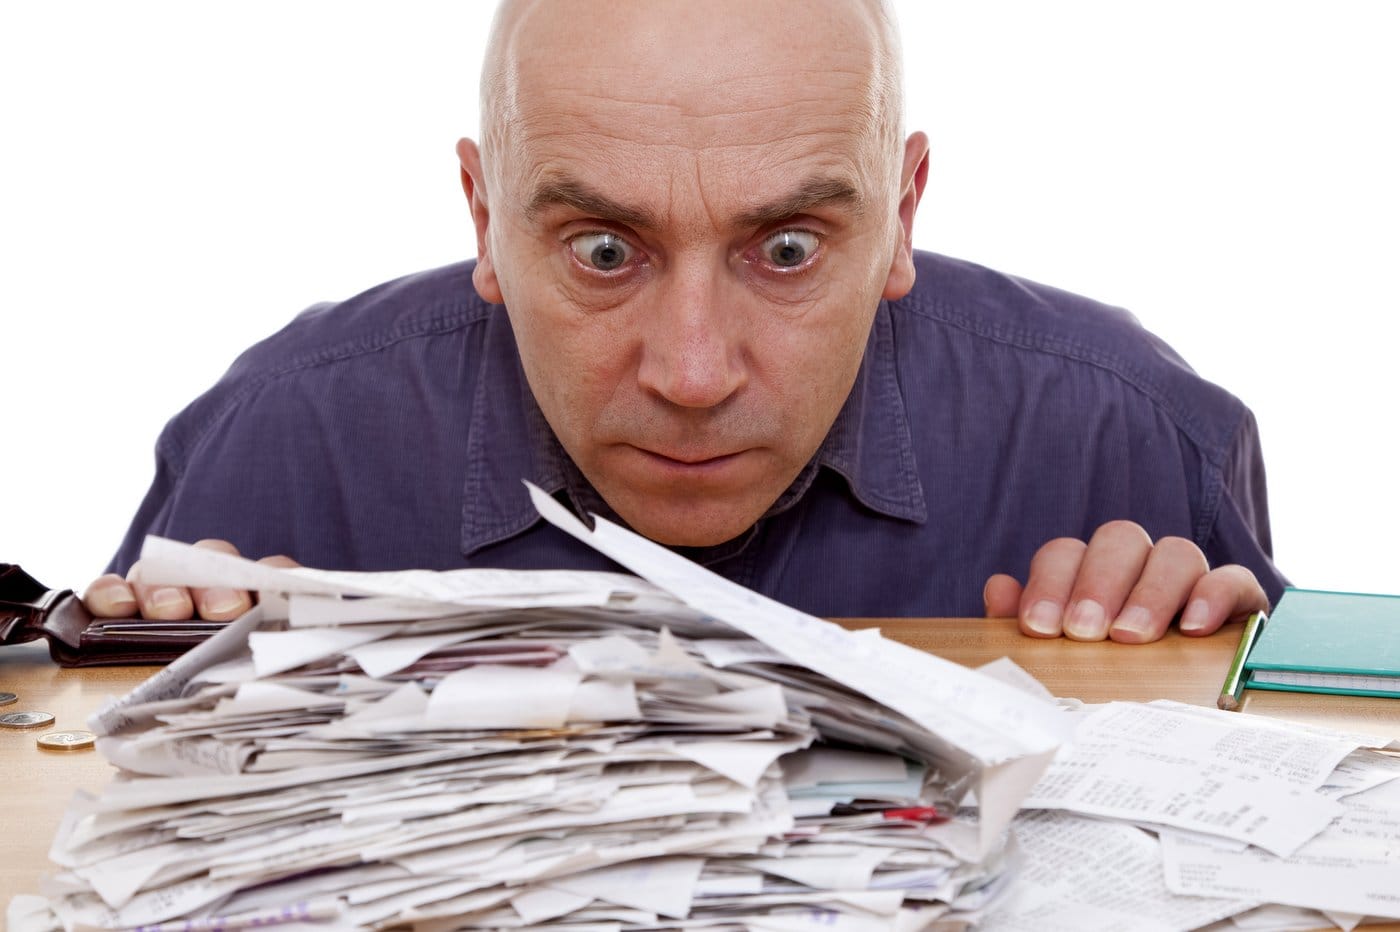 Worried man staring at pile of paper receipts